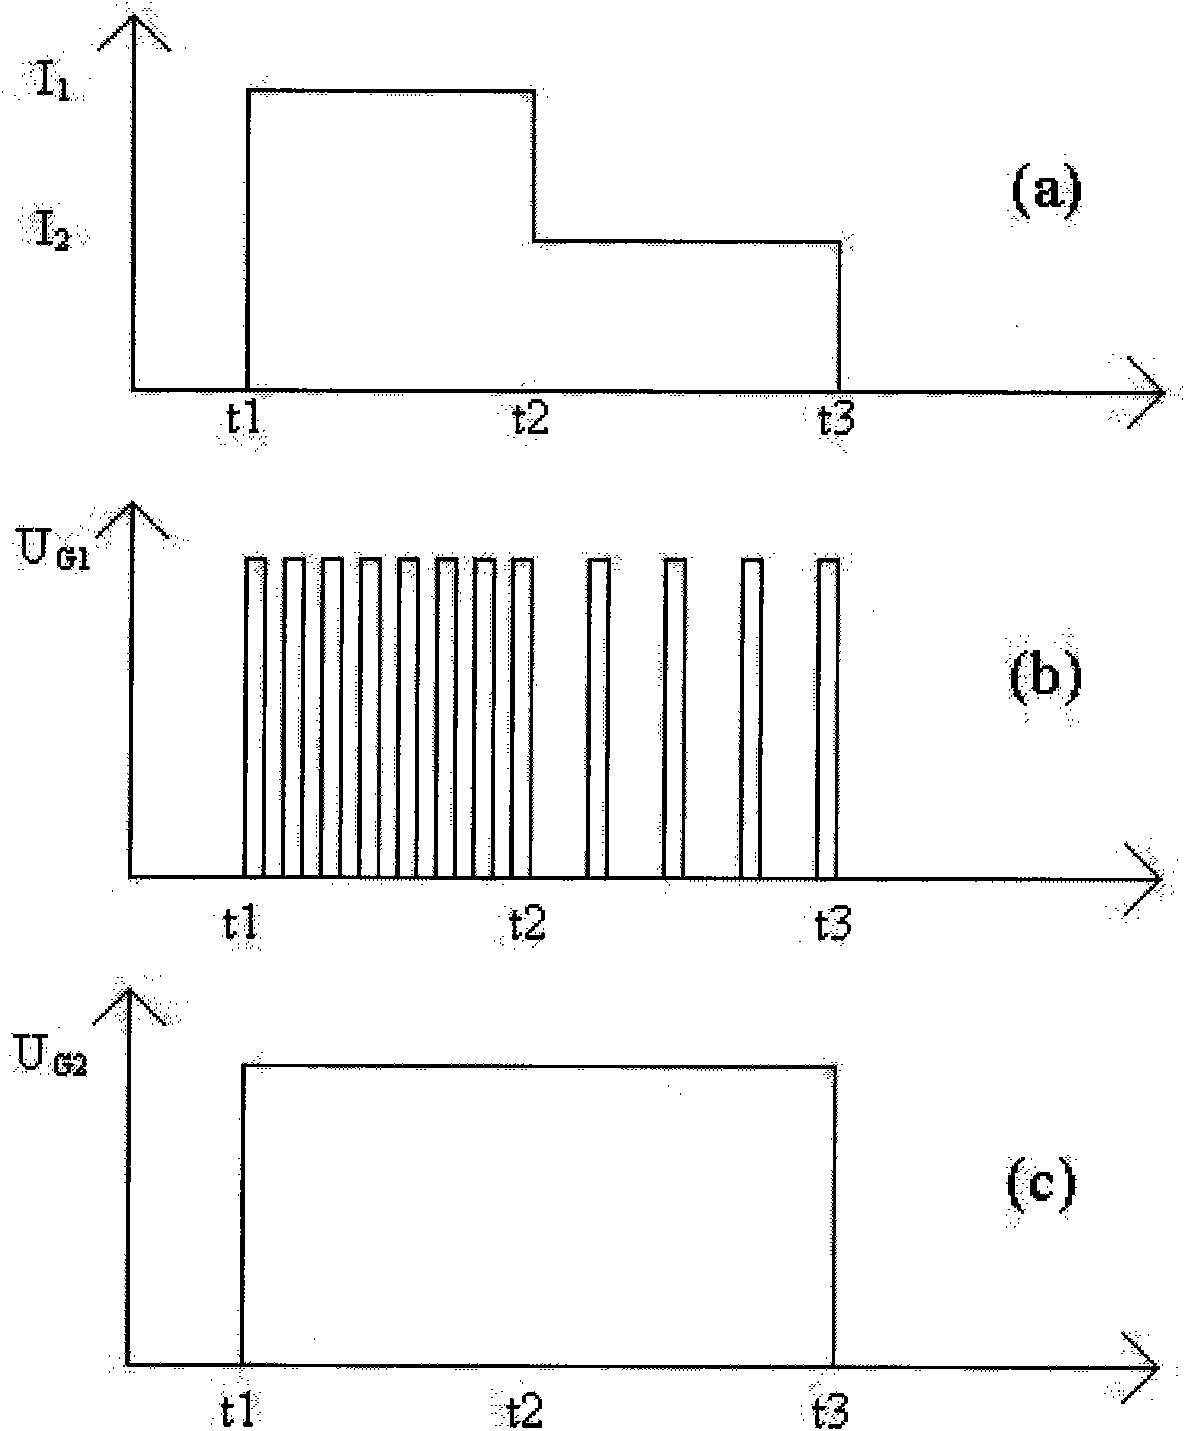 IGBT (insulated gate bipolar transistor) based drive circuit of control rod control system